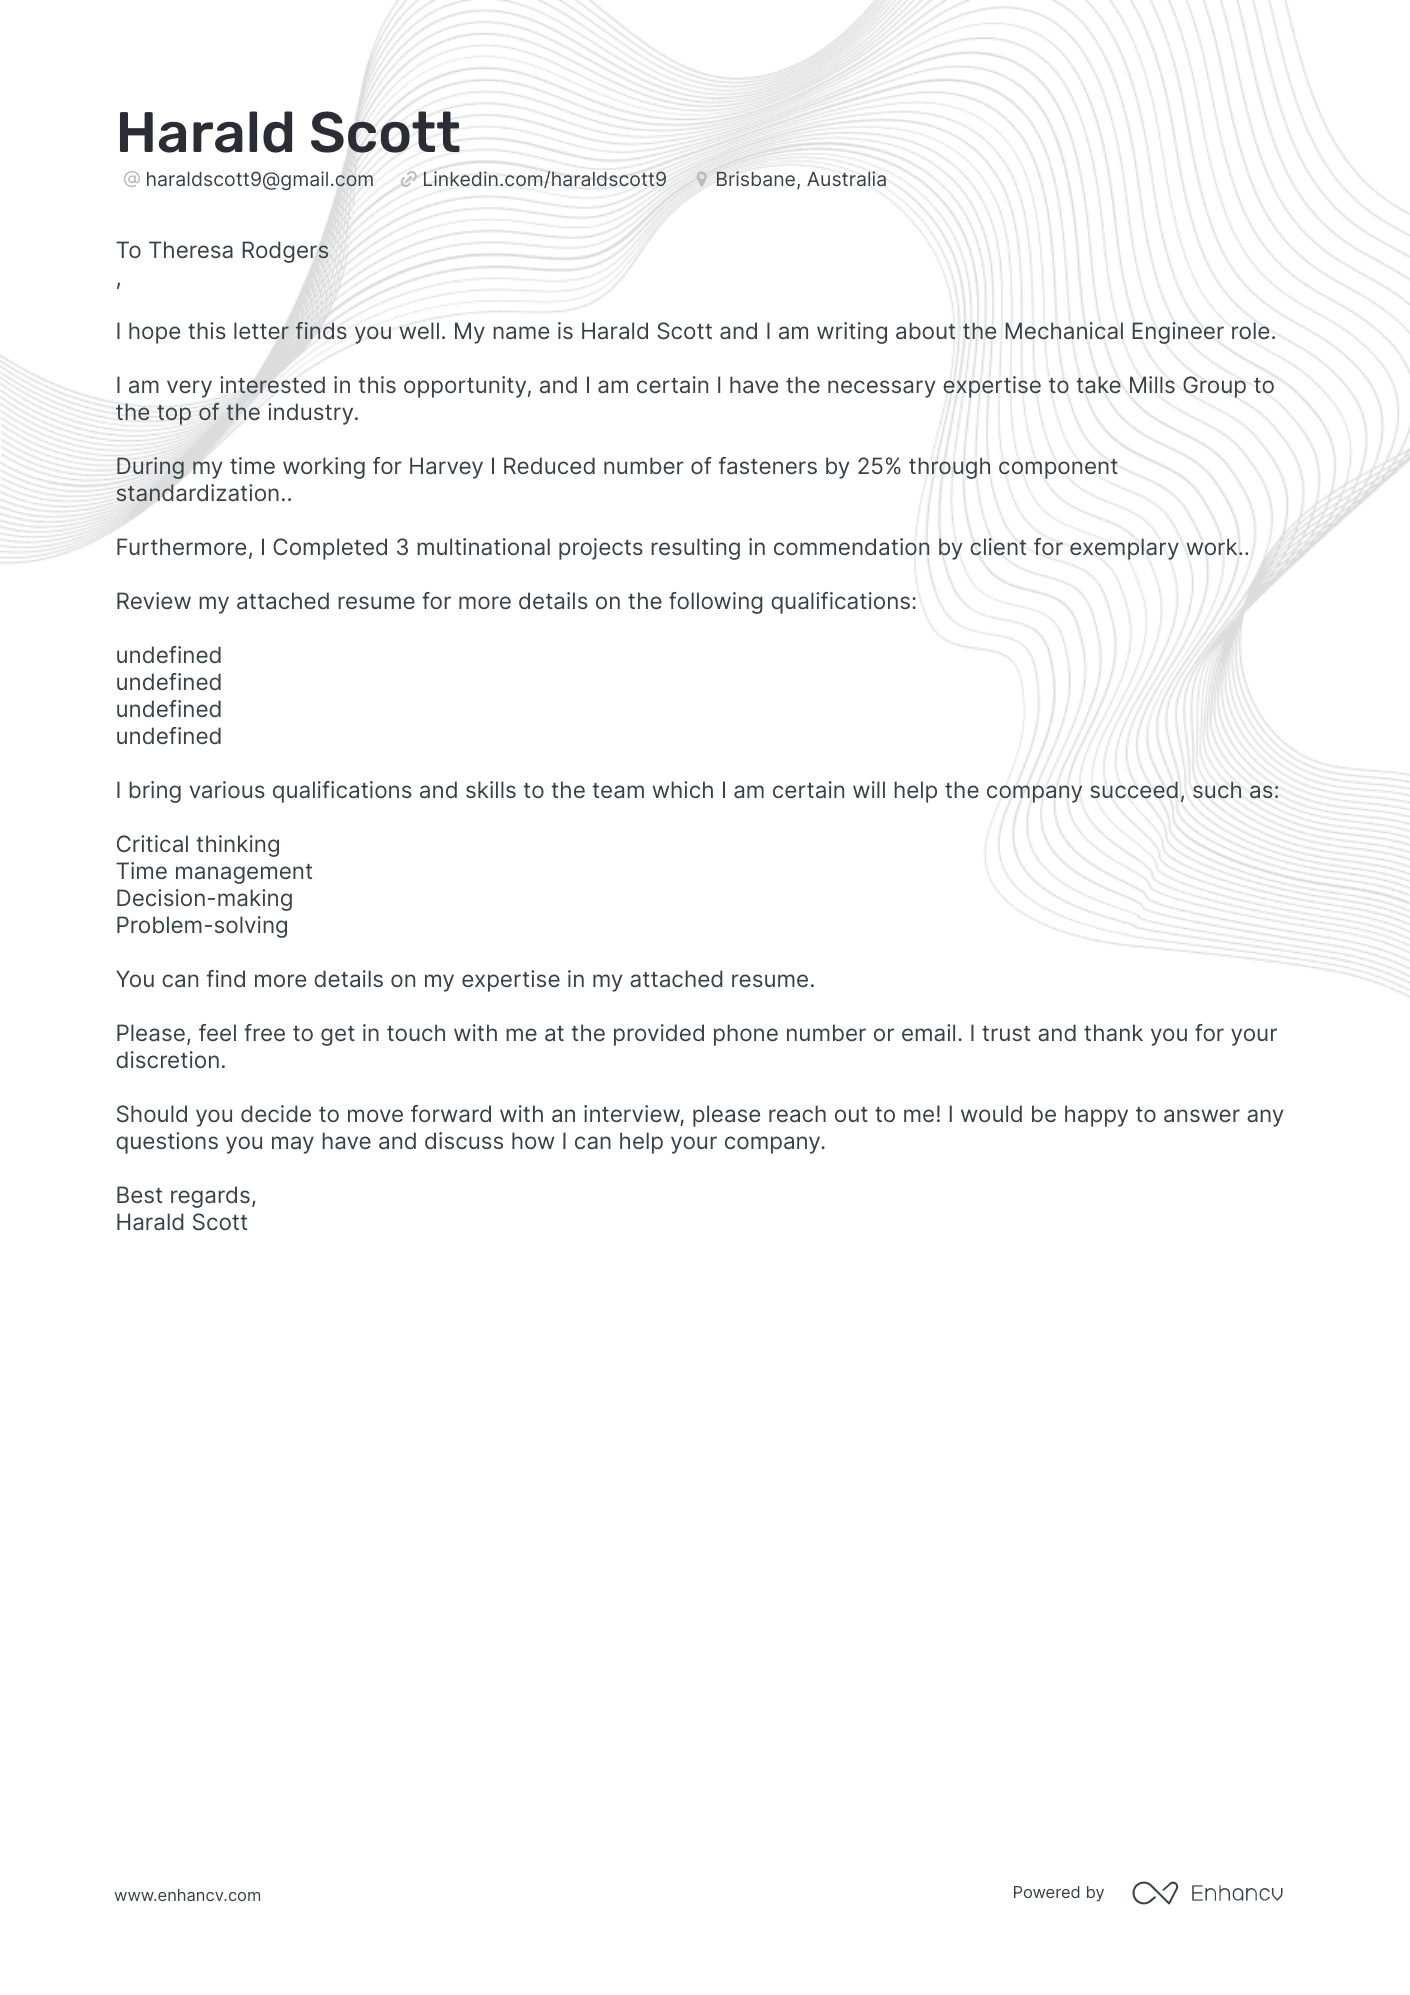 Mechanical Engineer cover letter